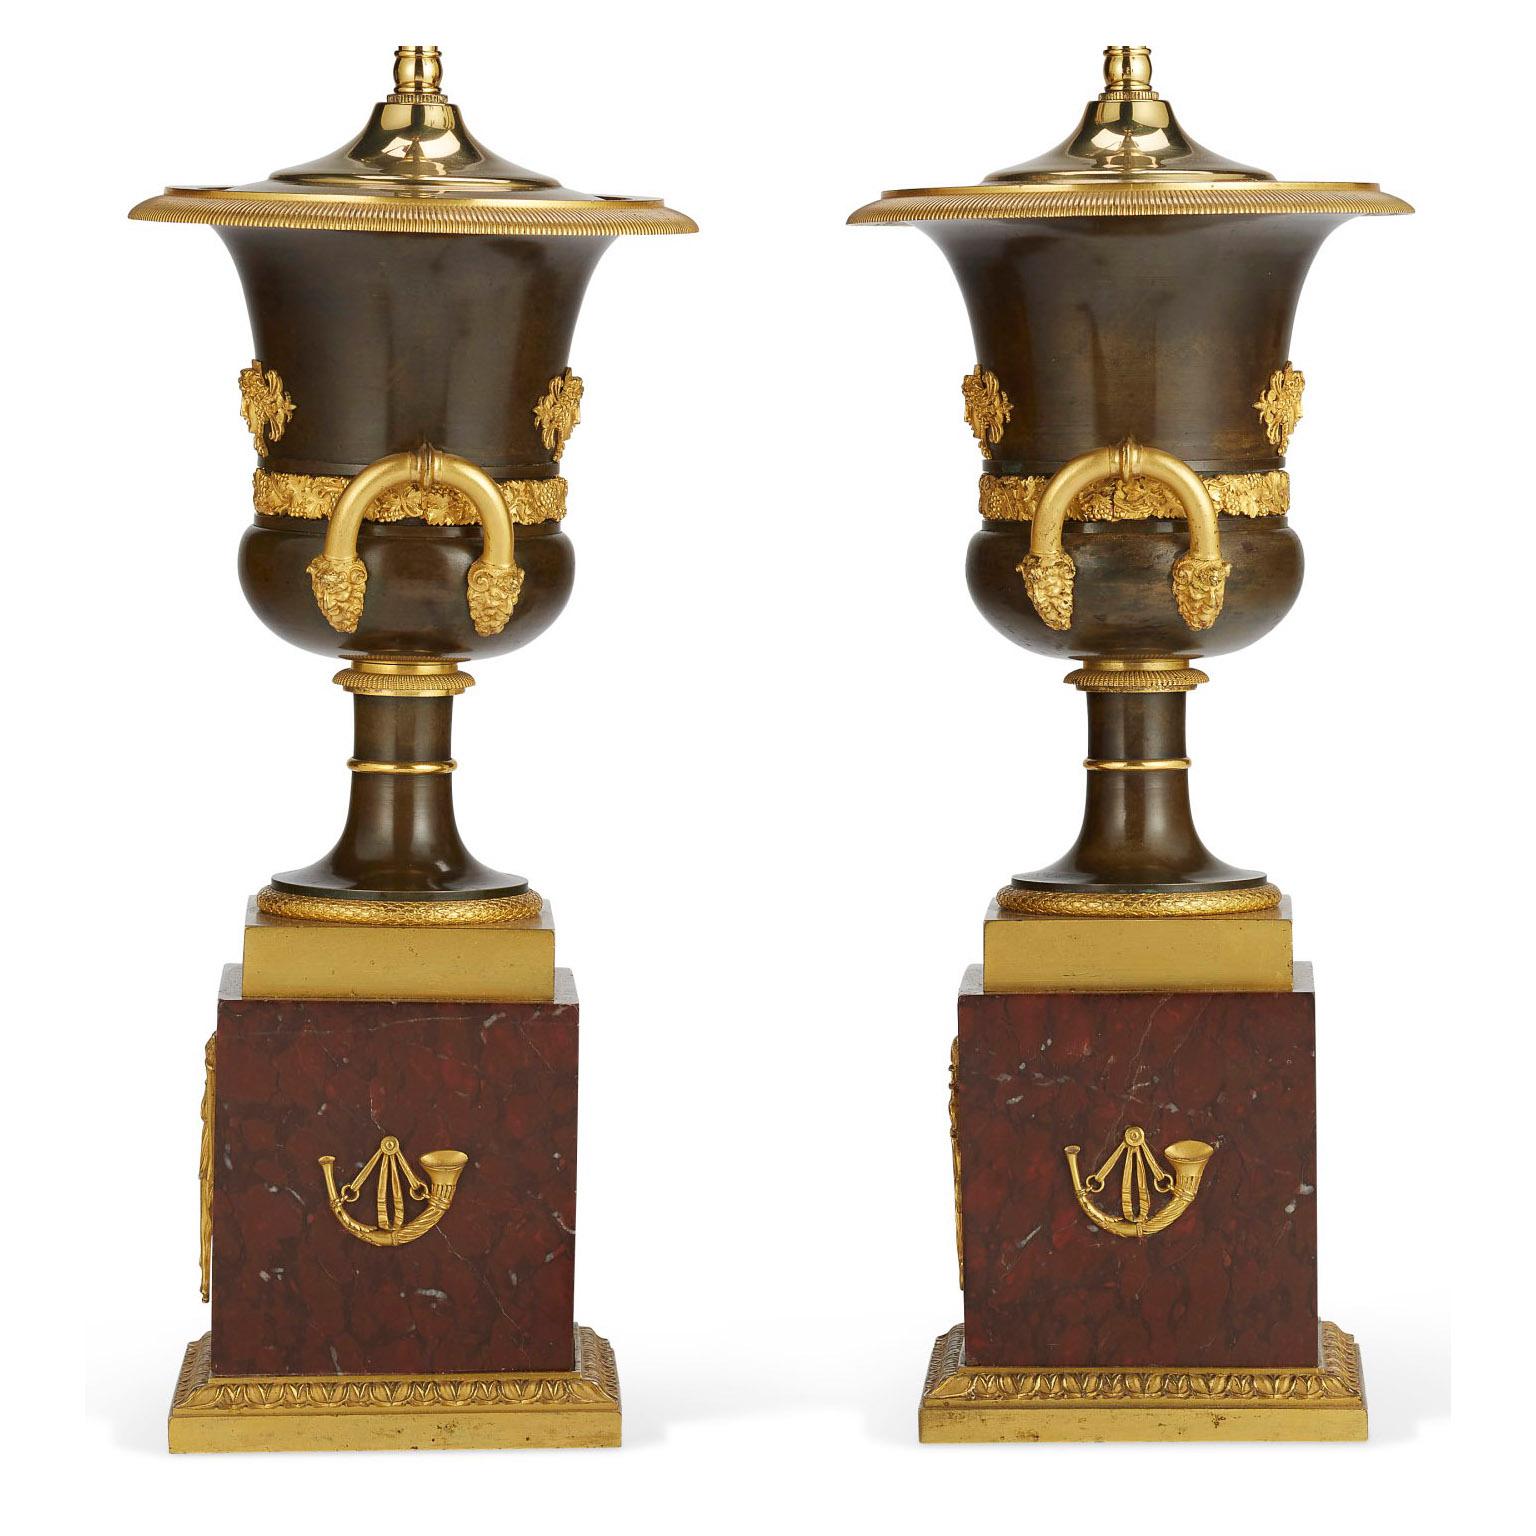 Marble Pair French 19th Century Napoleon III Empire Style Gilt-Bronze Urn Table Lamps For Sale